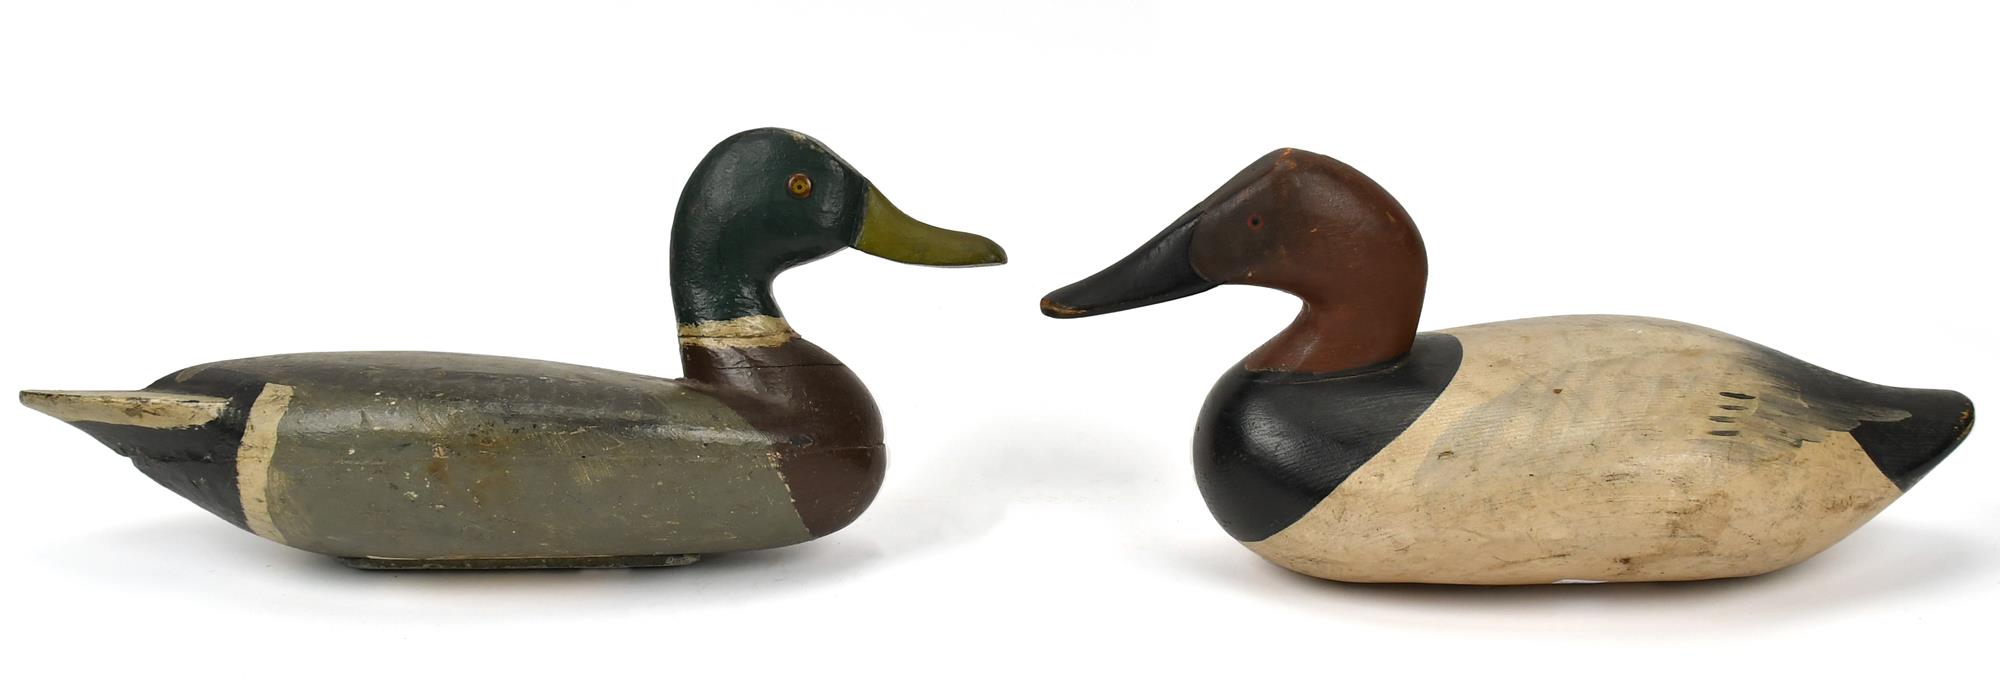 TWO DUCK DECOYS. Canvasback duck wooden